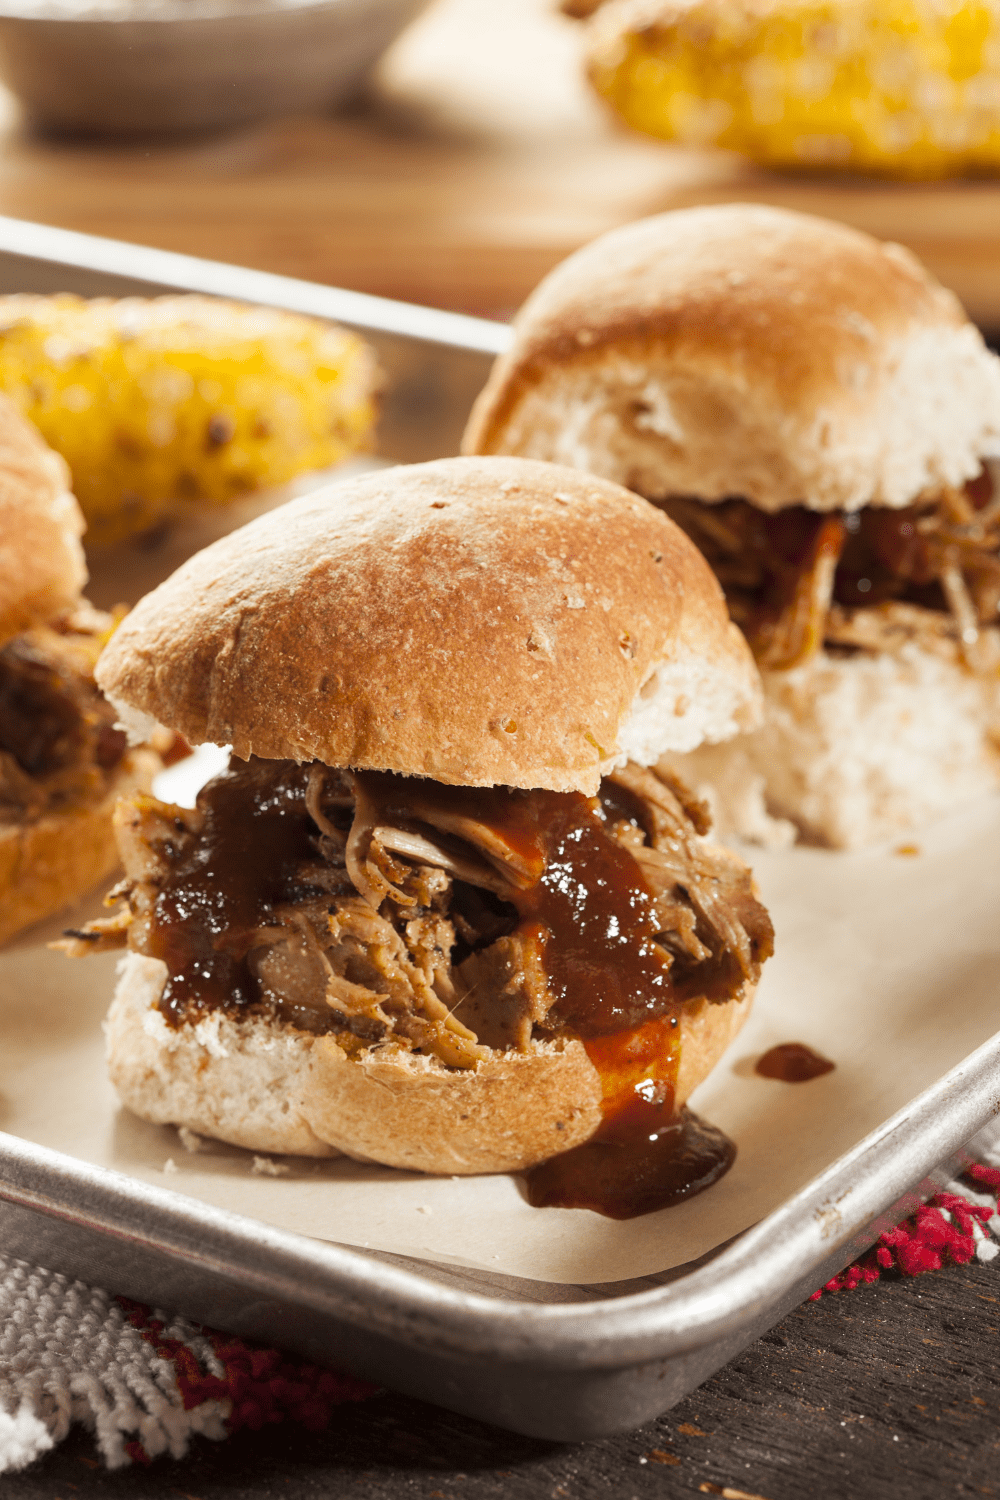 Buns with thick pulled pork and sauce filling, 